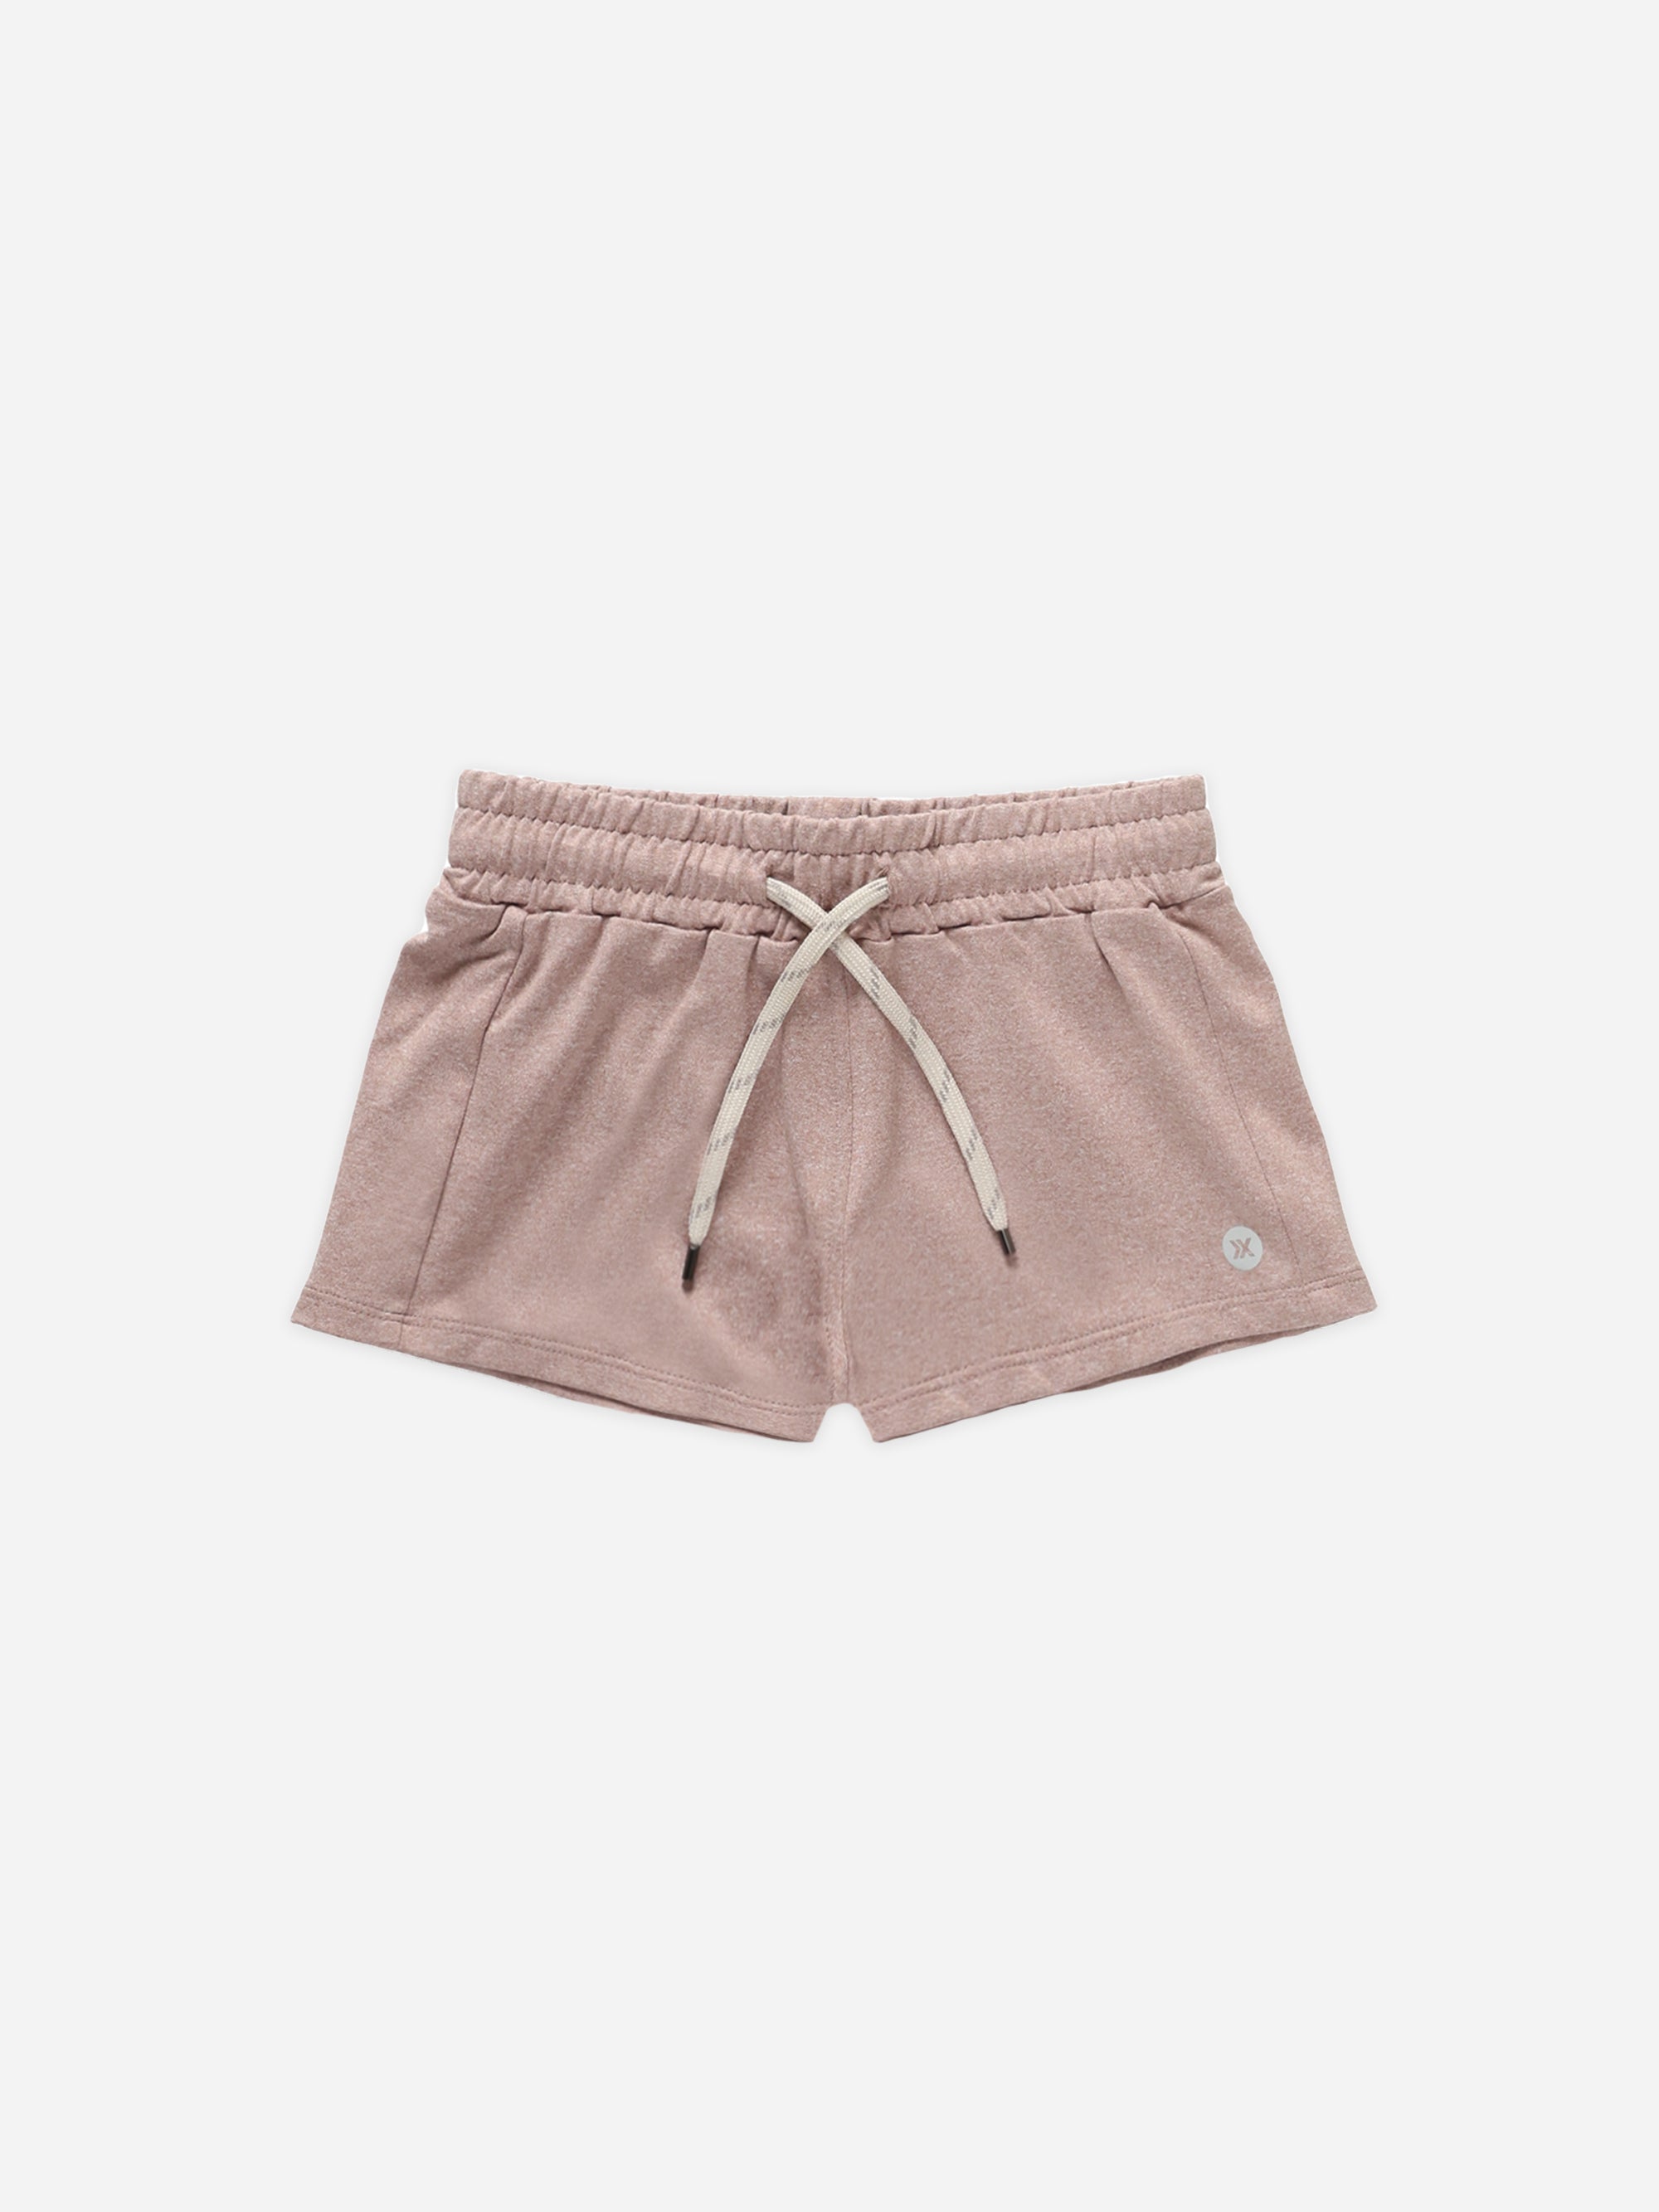 Laguna Tech Short || Heathered Mauve - Rylee + Cru | Kids Clothes | Trendy Baby Clothes | Modern Infant Outfits |